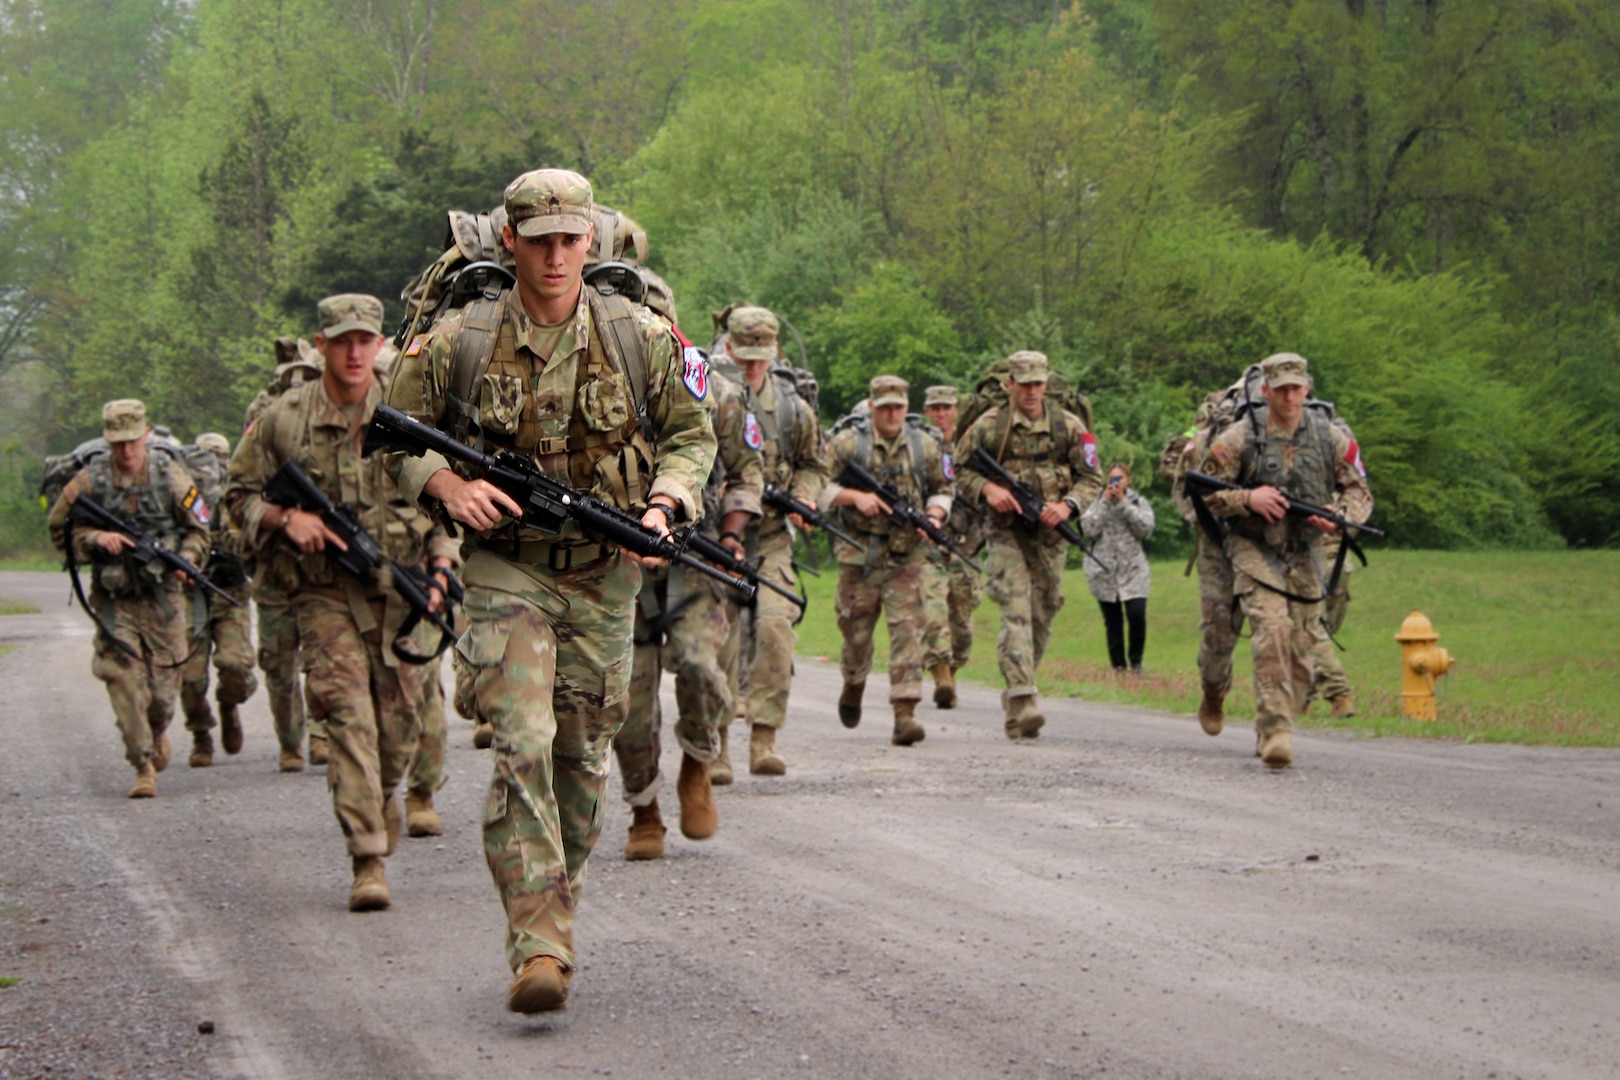 Sgt. Jordy Brewer with the 1st Battalion, 149th Infantry leads the pack in the ruck march event during the National Guard Region III Best Warrior Competition in Tullahoma, Tenn., April 26, 2018. Brewer, Kentucky’s NCO of the Year, would go on to win the Region III and national titles, sending him to the All-Army Best Warrior in September.